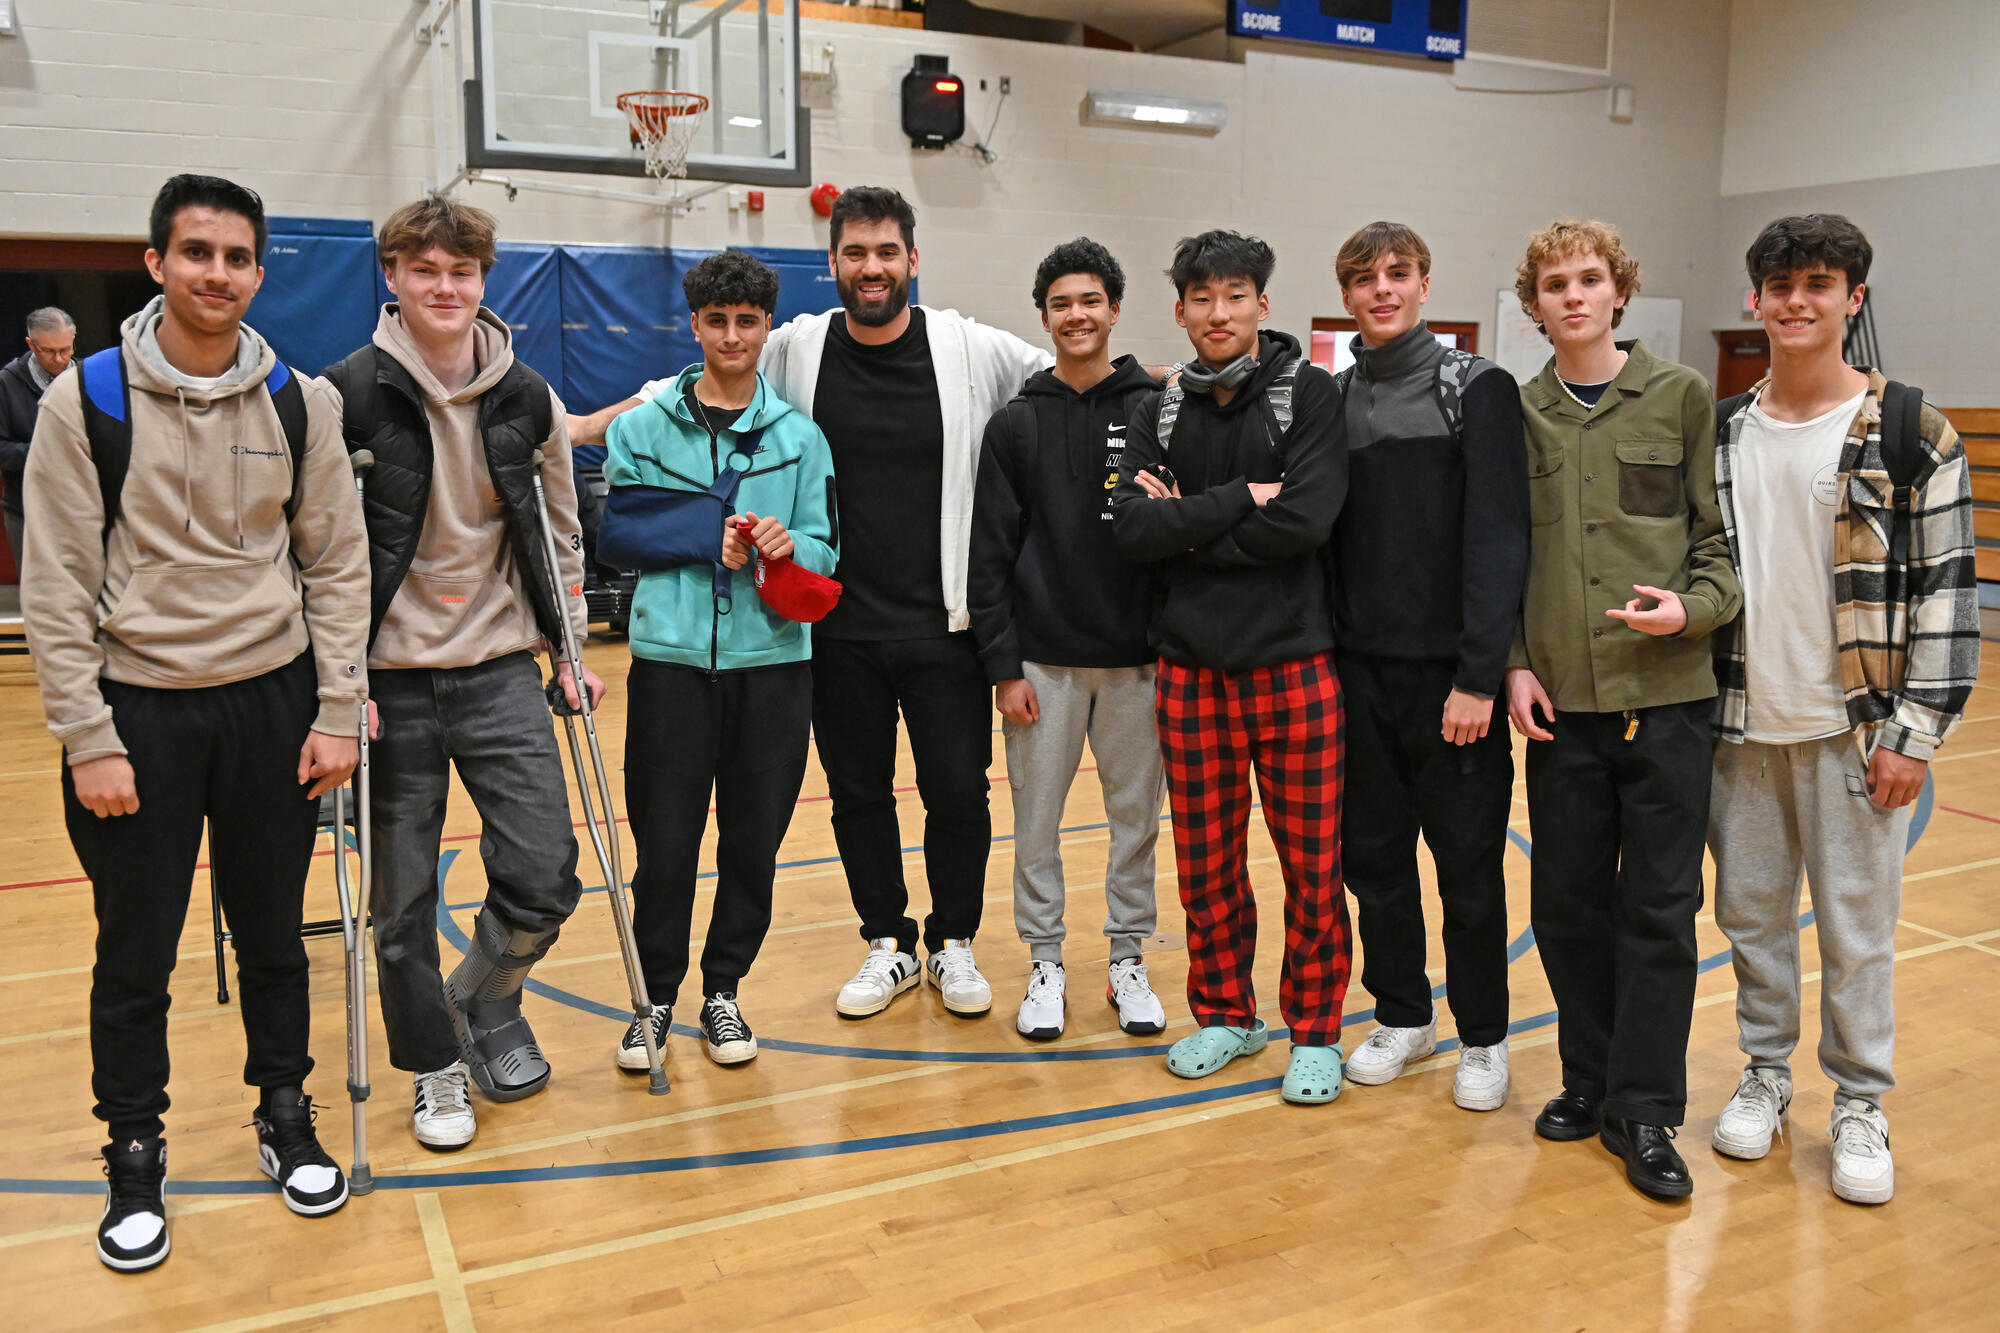 Laurent Duvernay-Tardif poses with a group of SMUS students